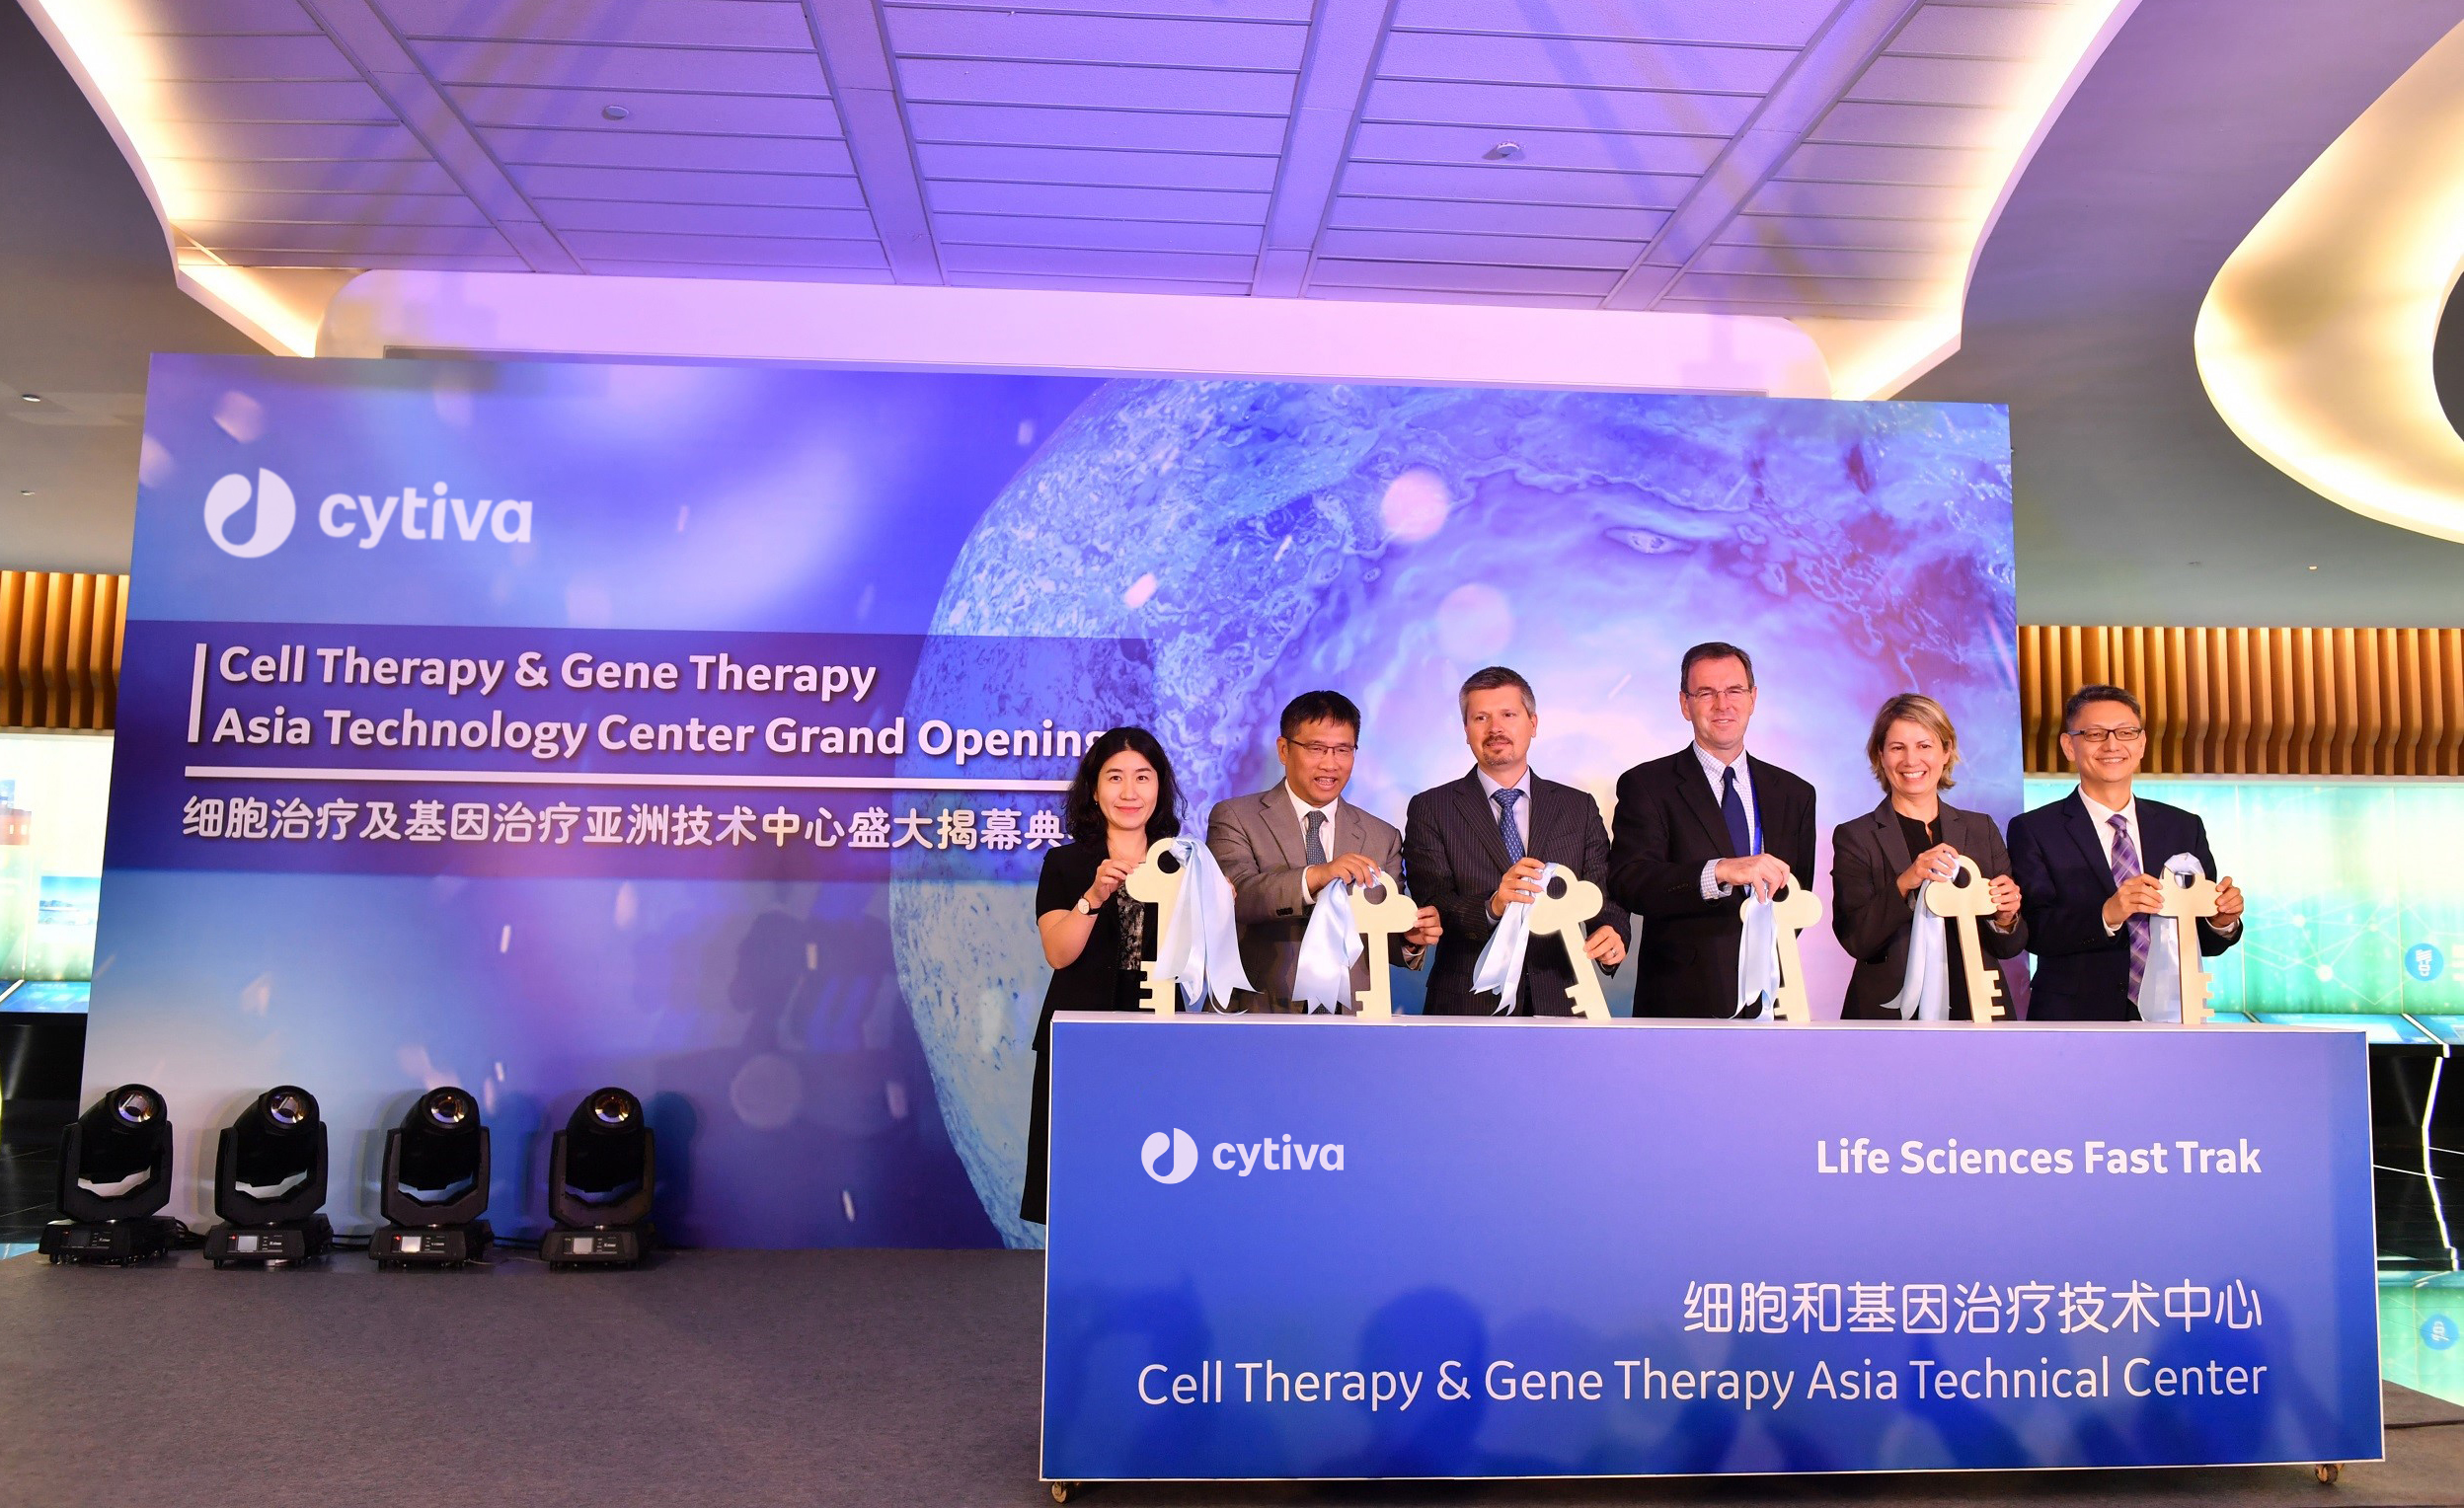 Shanghai Cell therapy Fast Trak opening